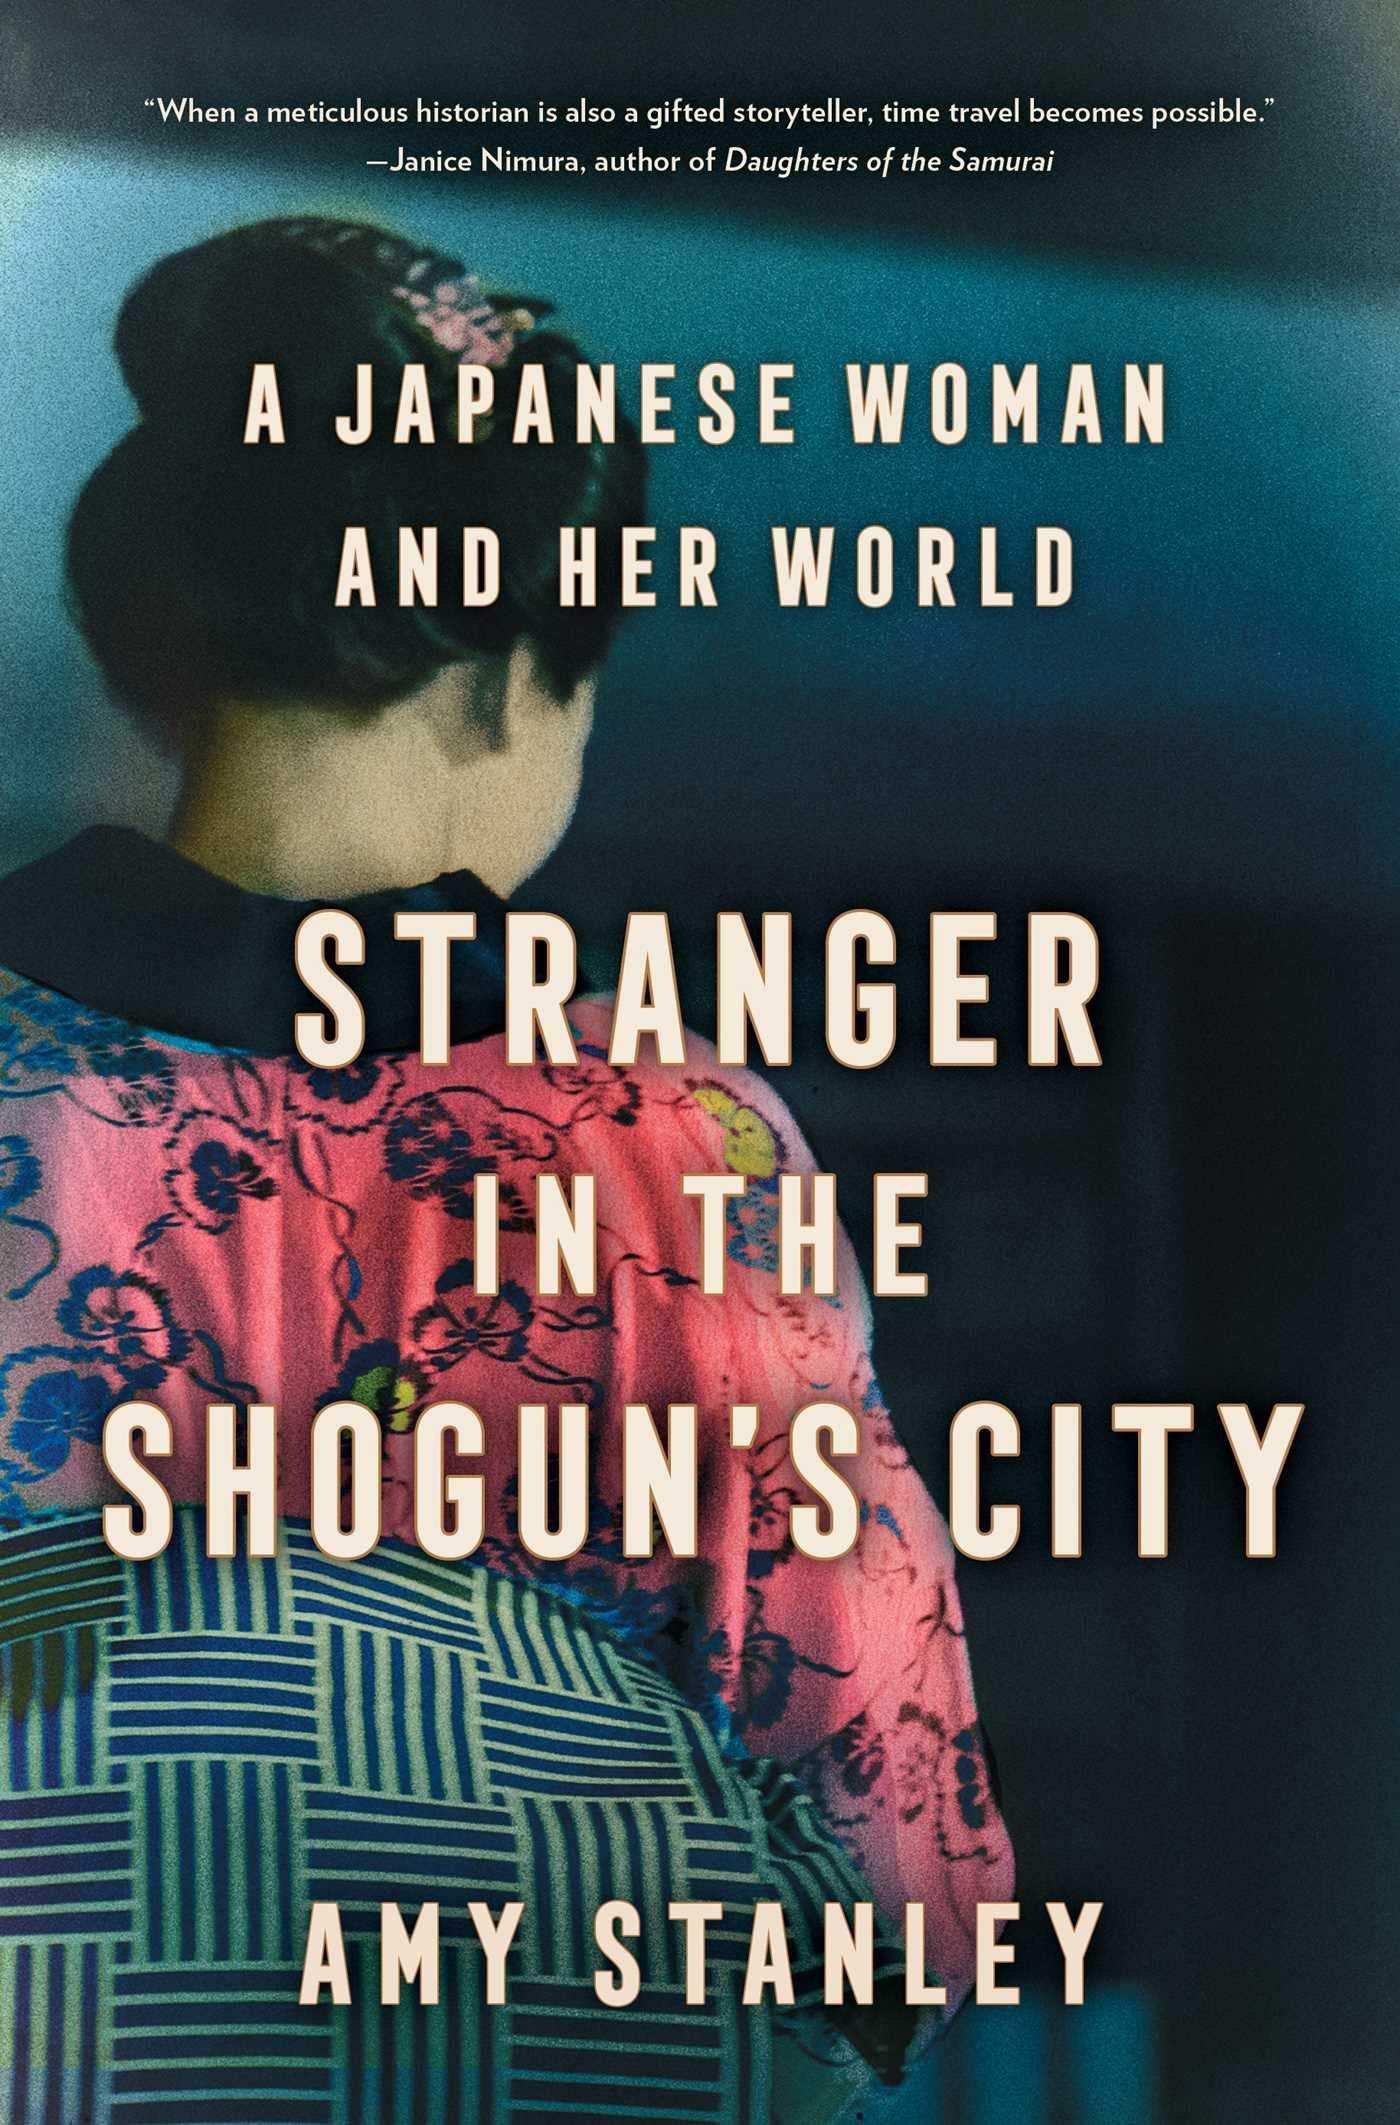 Travels in a Vanished City: On Timon Screech’s “Tokyo Before Tokyo” and Amy Stanley’s “Stranger in the Shogun’s City”